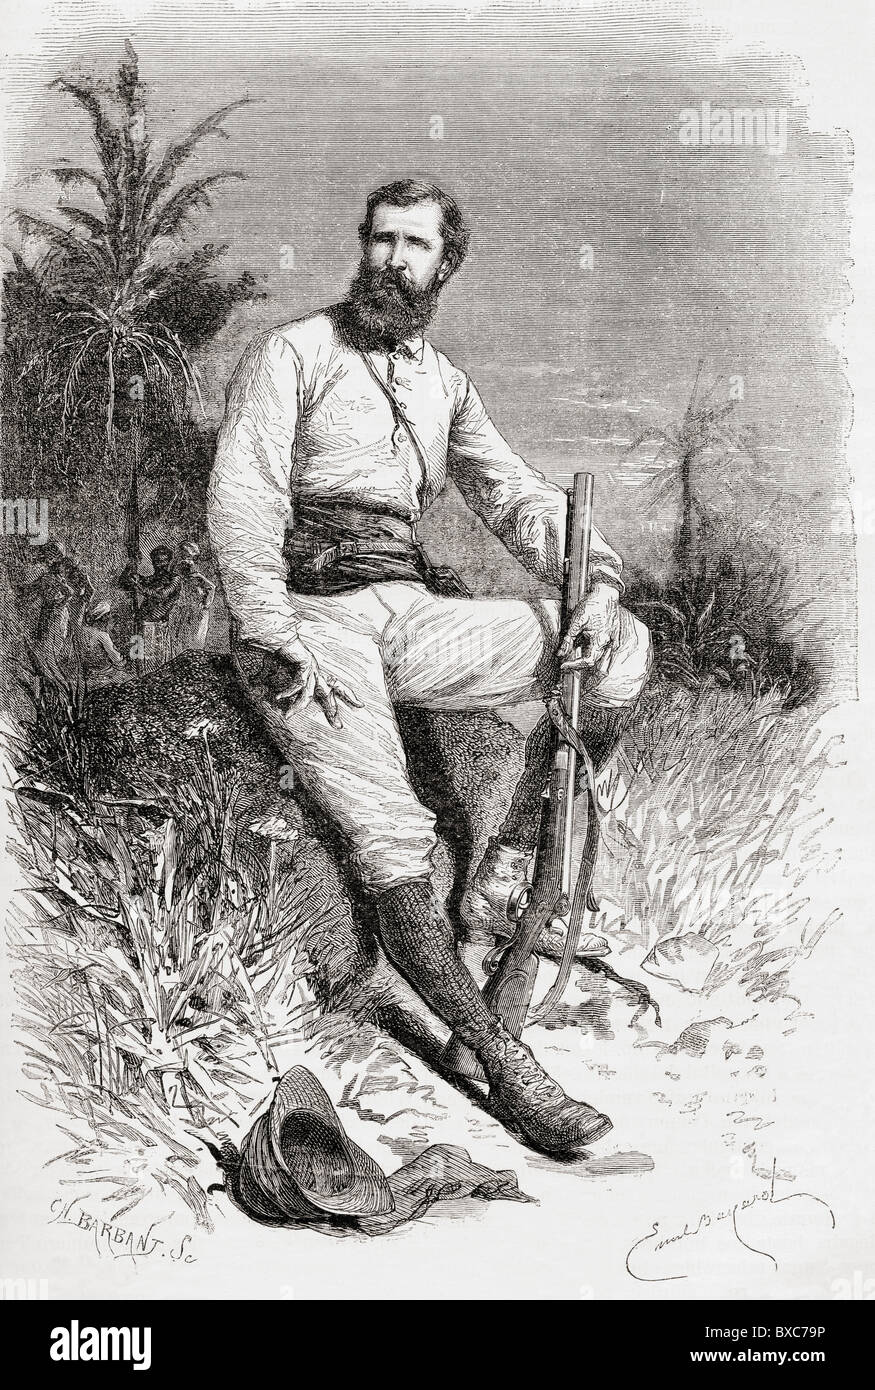 Verney Lovett Cameron, 1844 to 1894. English explorer in Central Africa. Stock Photo